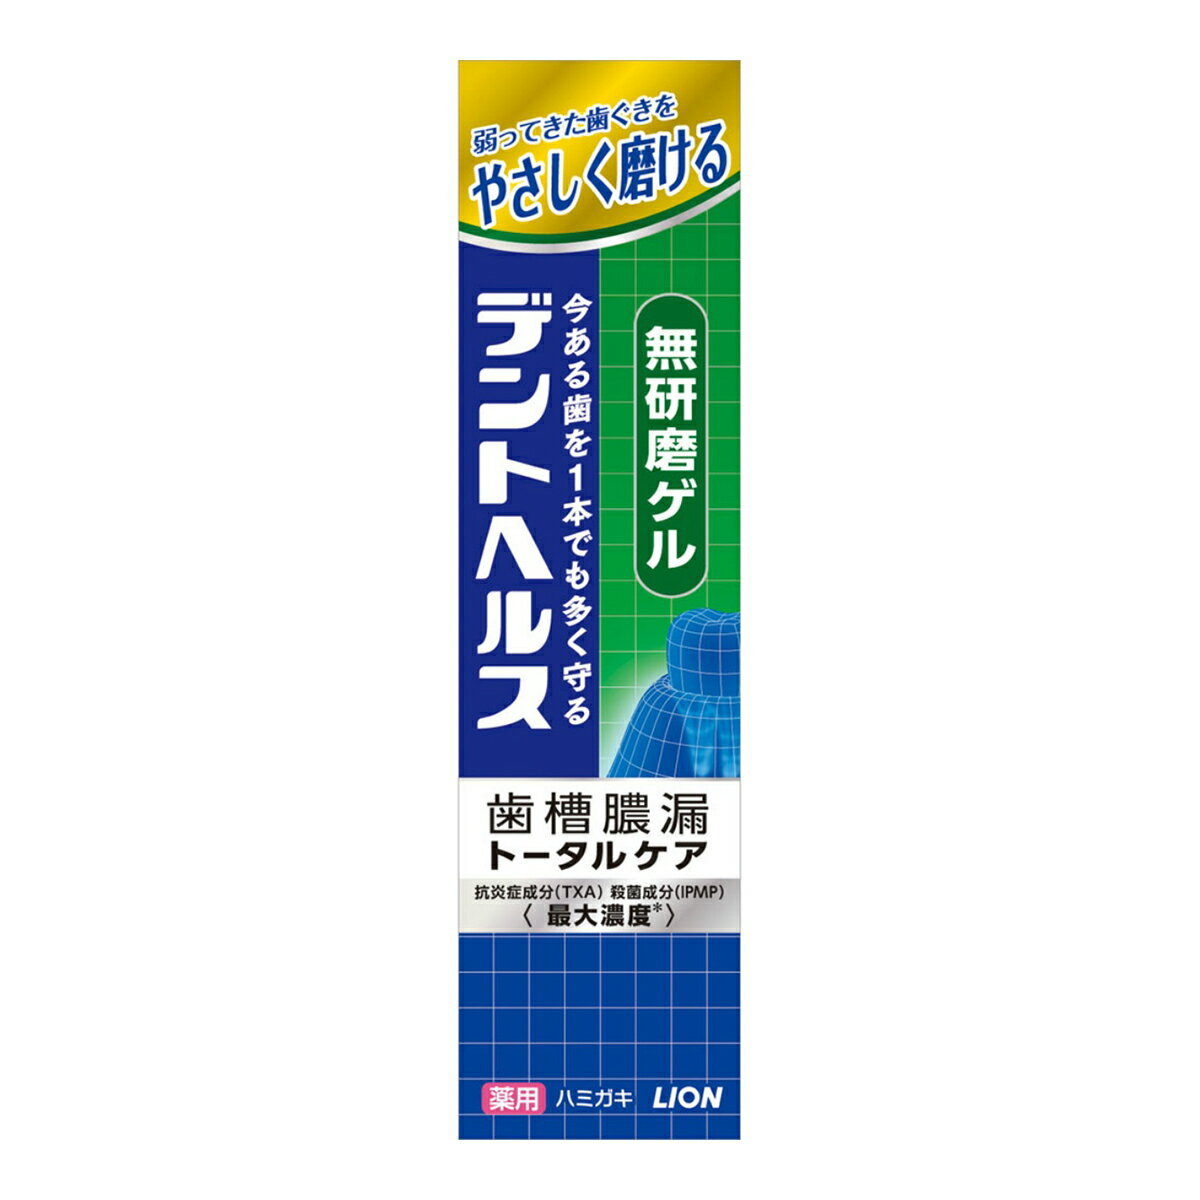 <strong>ライオン</strong>　<strong>デントヘルス</strong> <strong>薬用ハミガキ</strong><strong>無研磨ゲル</strong>　28g 医薬部外品　歯槽膿漏予防歯磨き (4903301249016 )